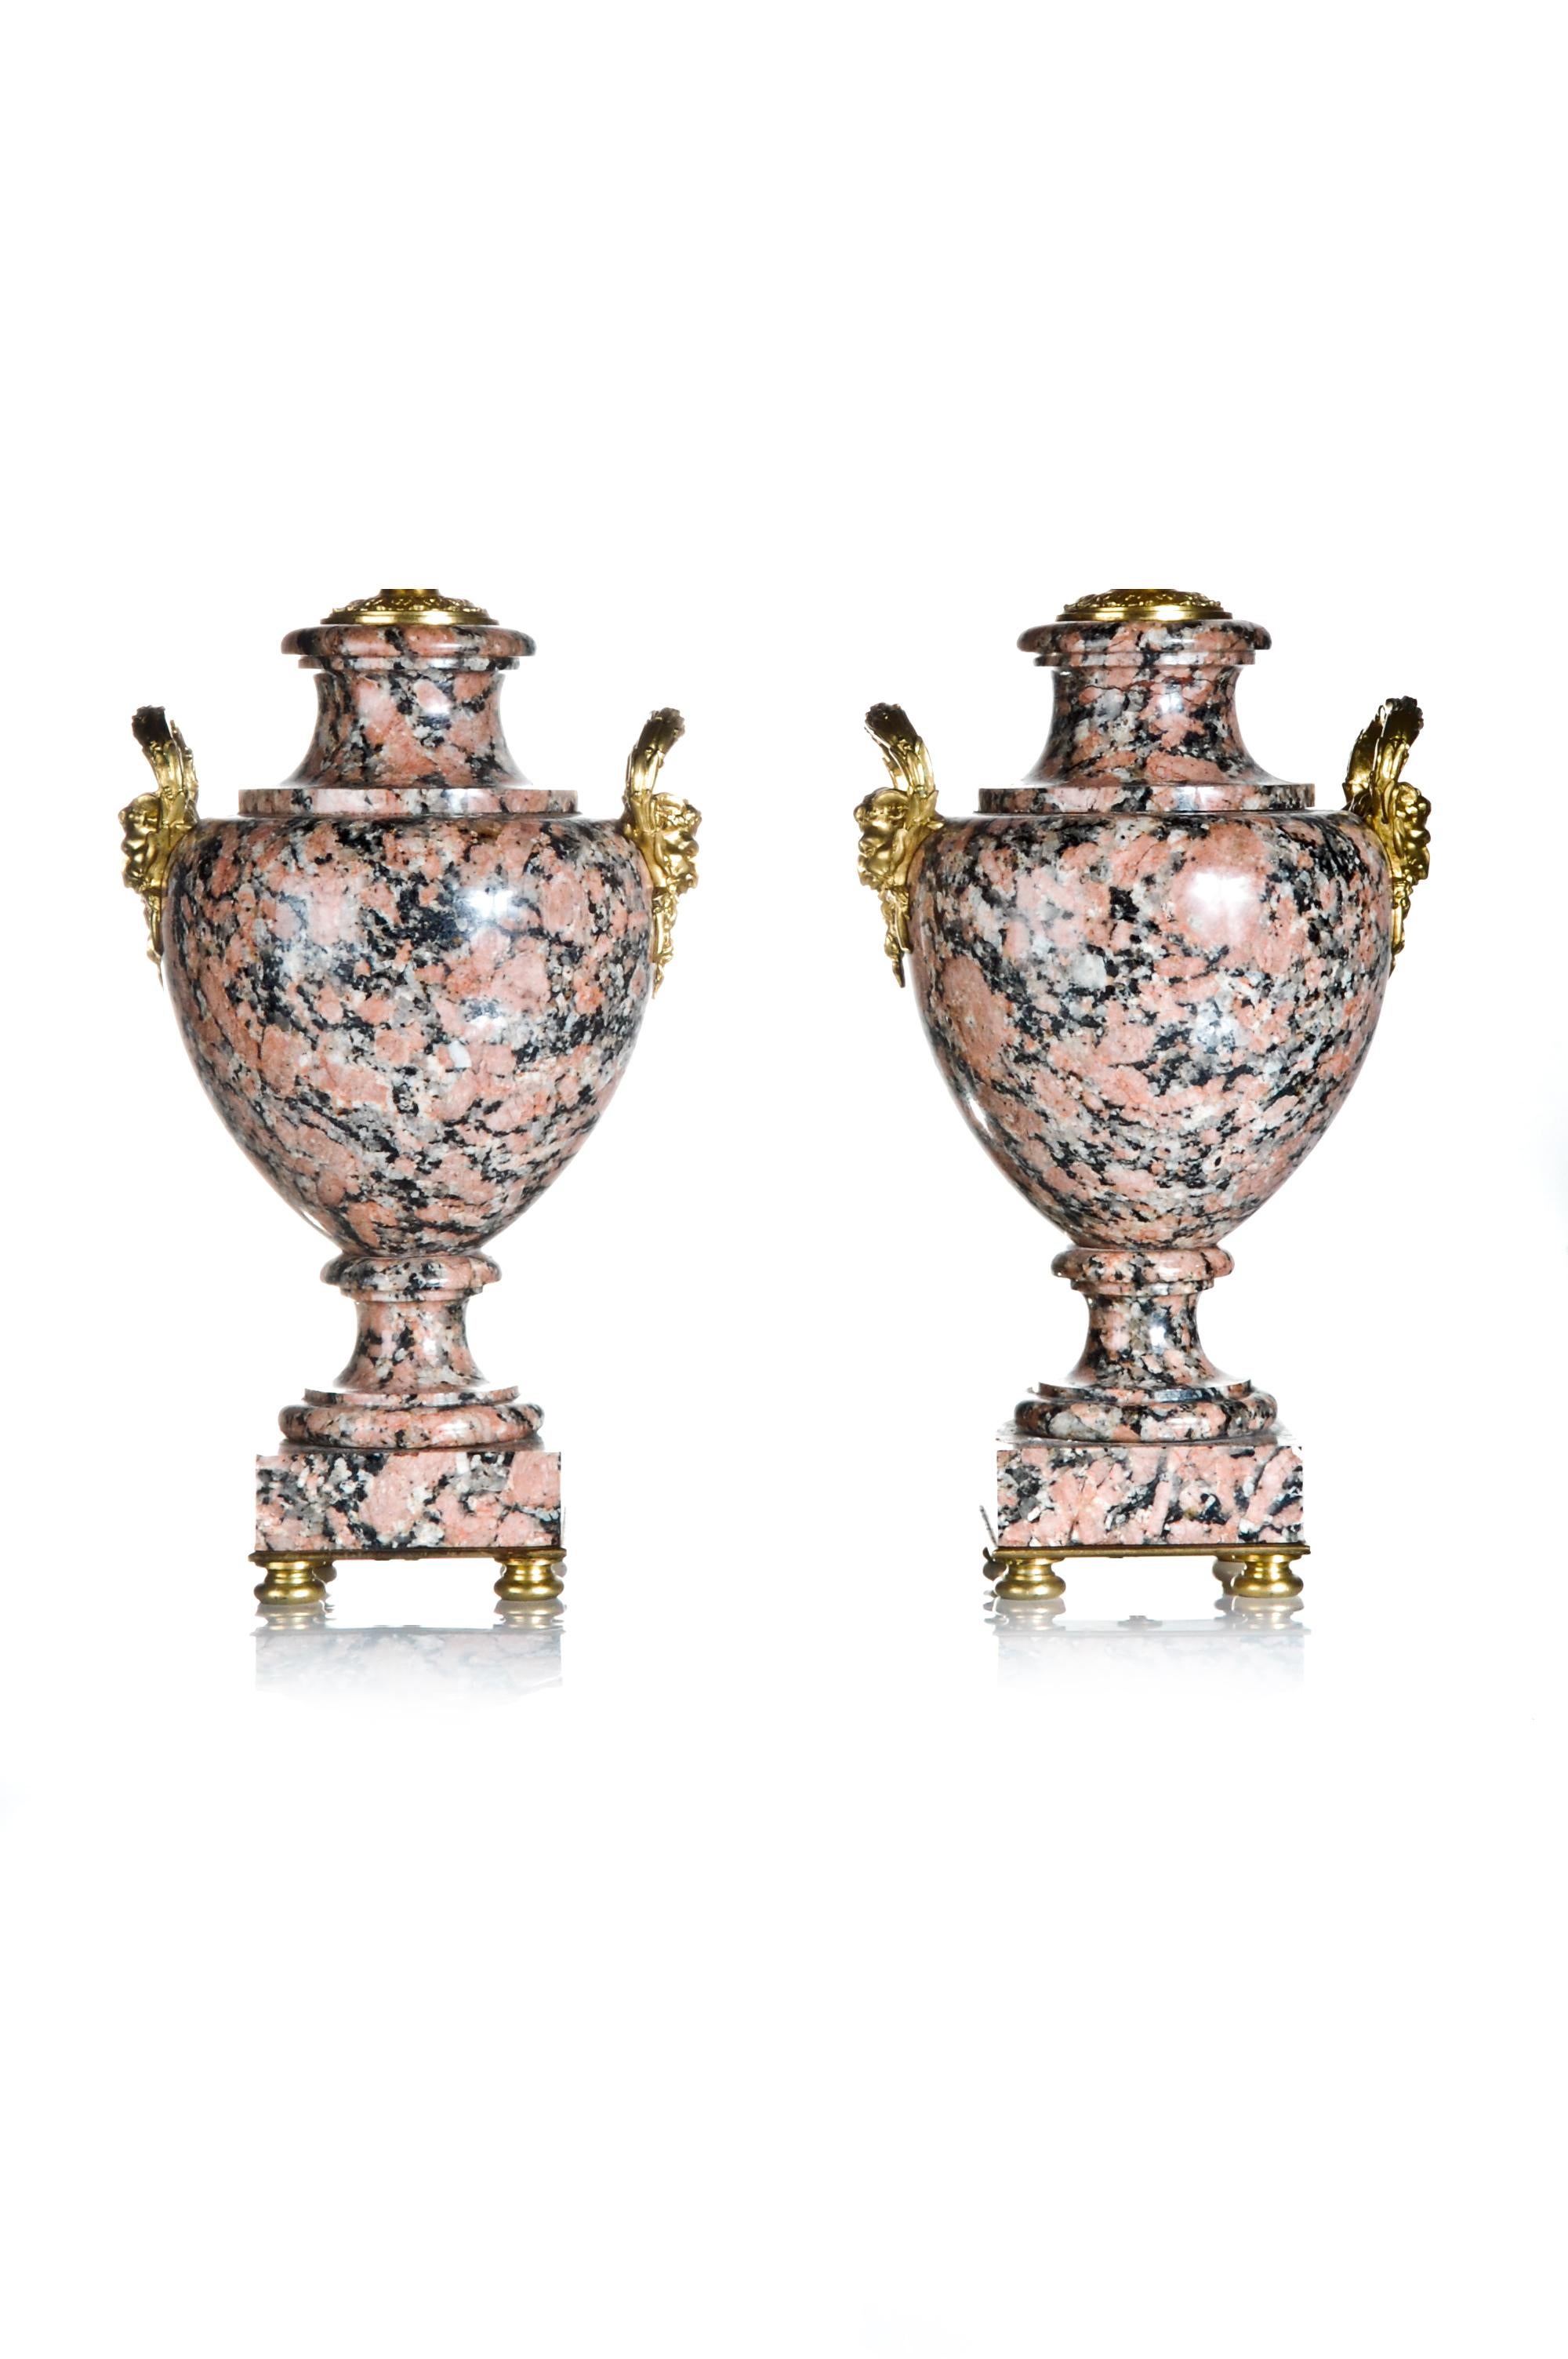 A pair of unique French Louis XVI Style urn form gilt bronze mounted pink and black granite lamps on square bases embellished with gilt bronze figural masks on the sides.